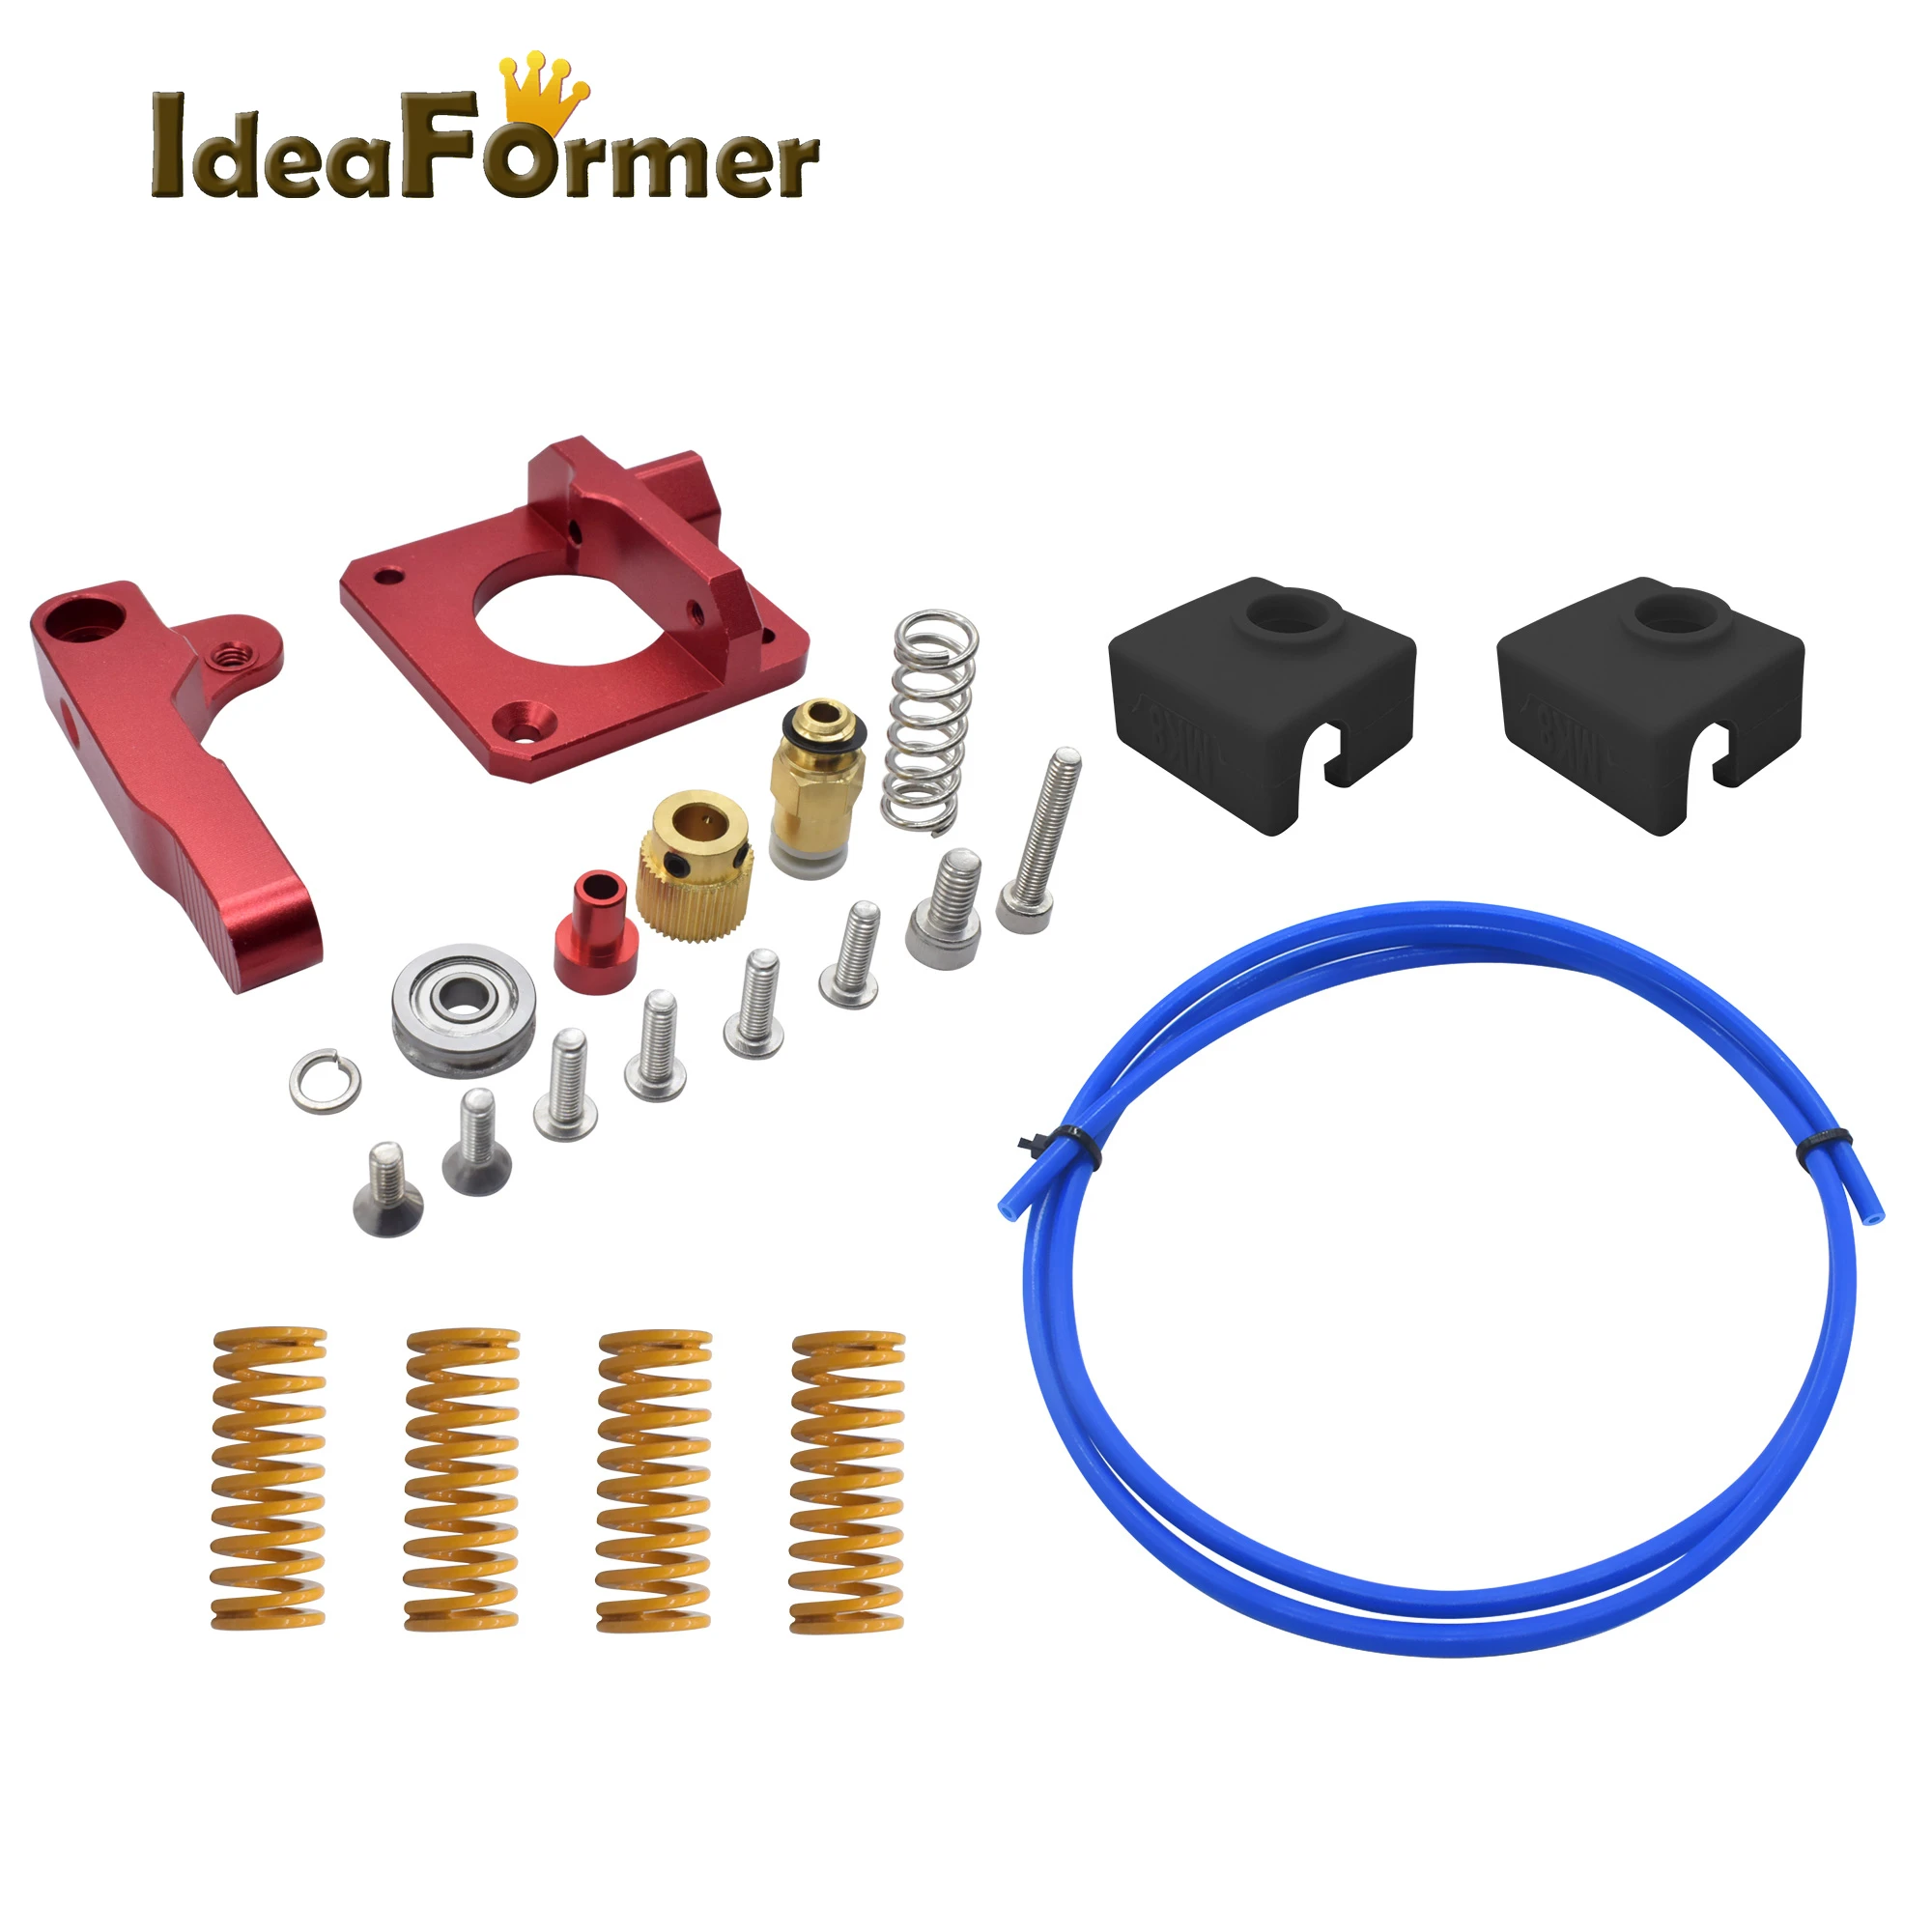 Ideaformer 3D Parts 1set CR10 Extruder Upgrade Kit with hot bed leveling spring + Motor Dampers +1m blue ptfe tube for Creality